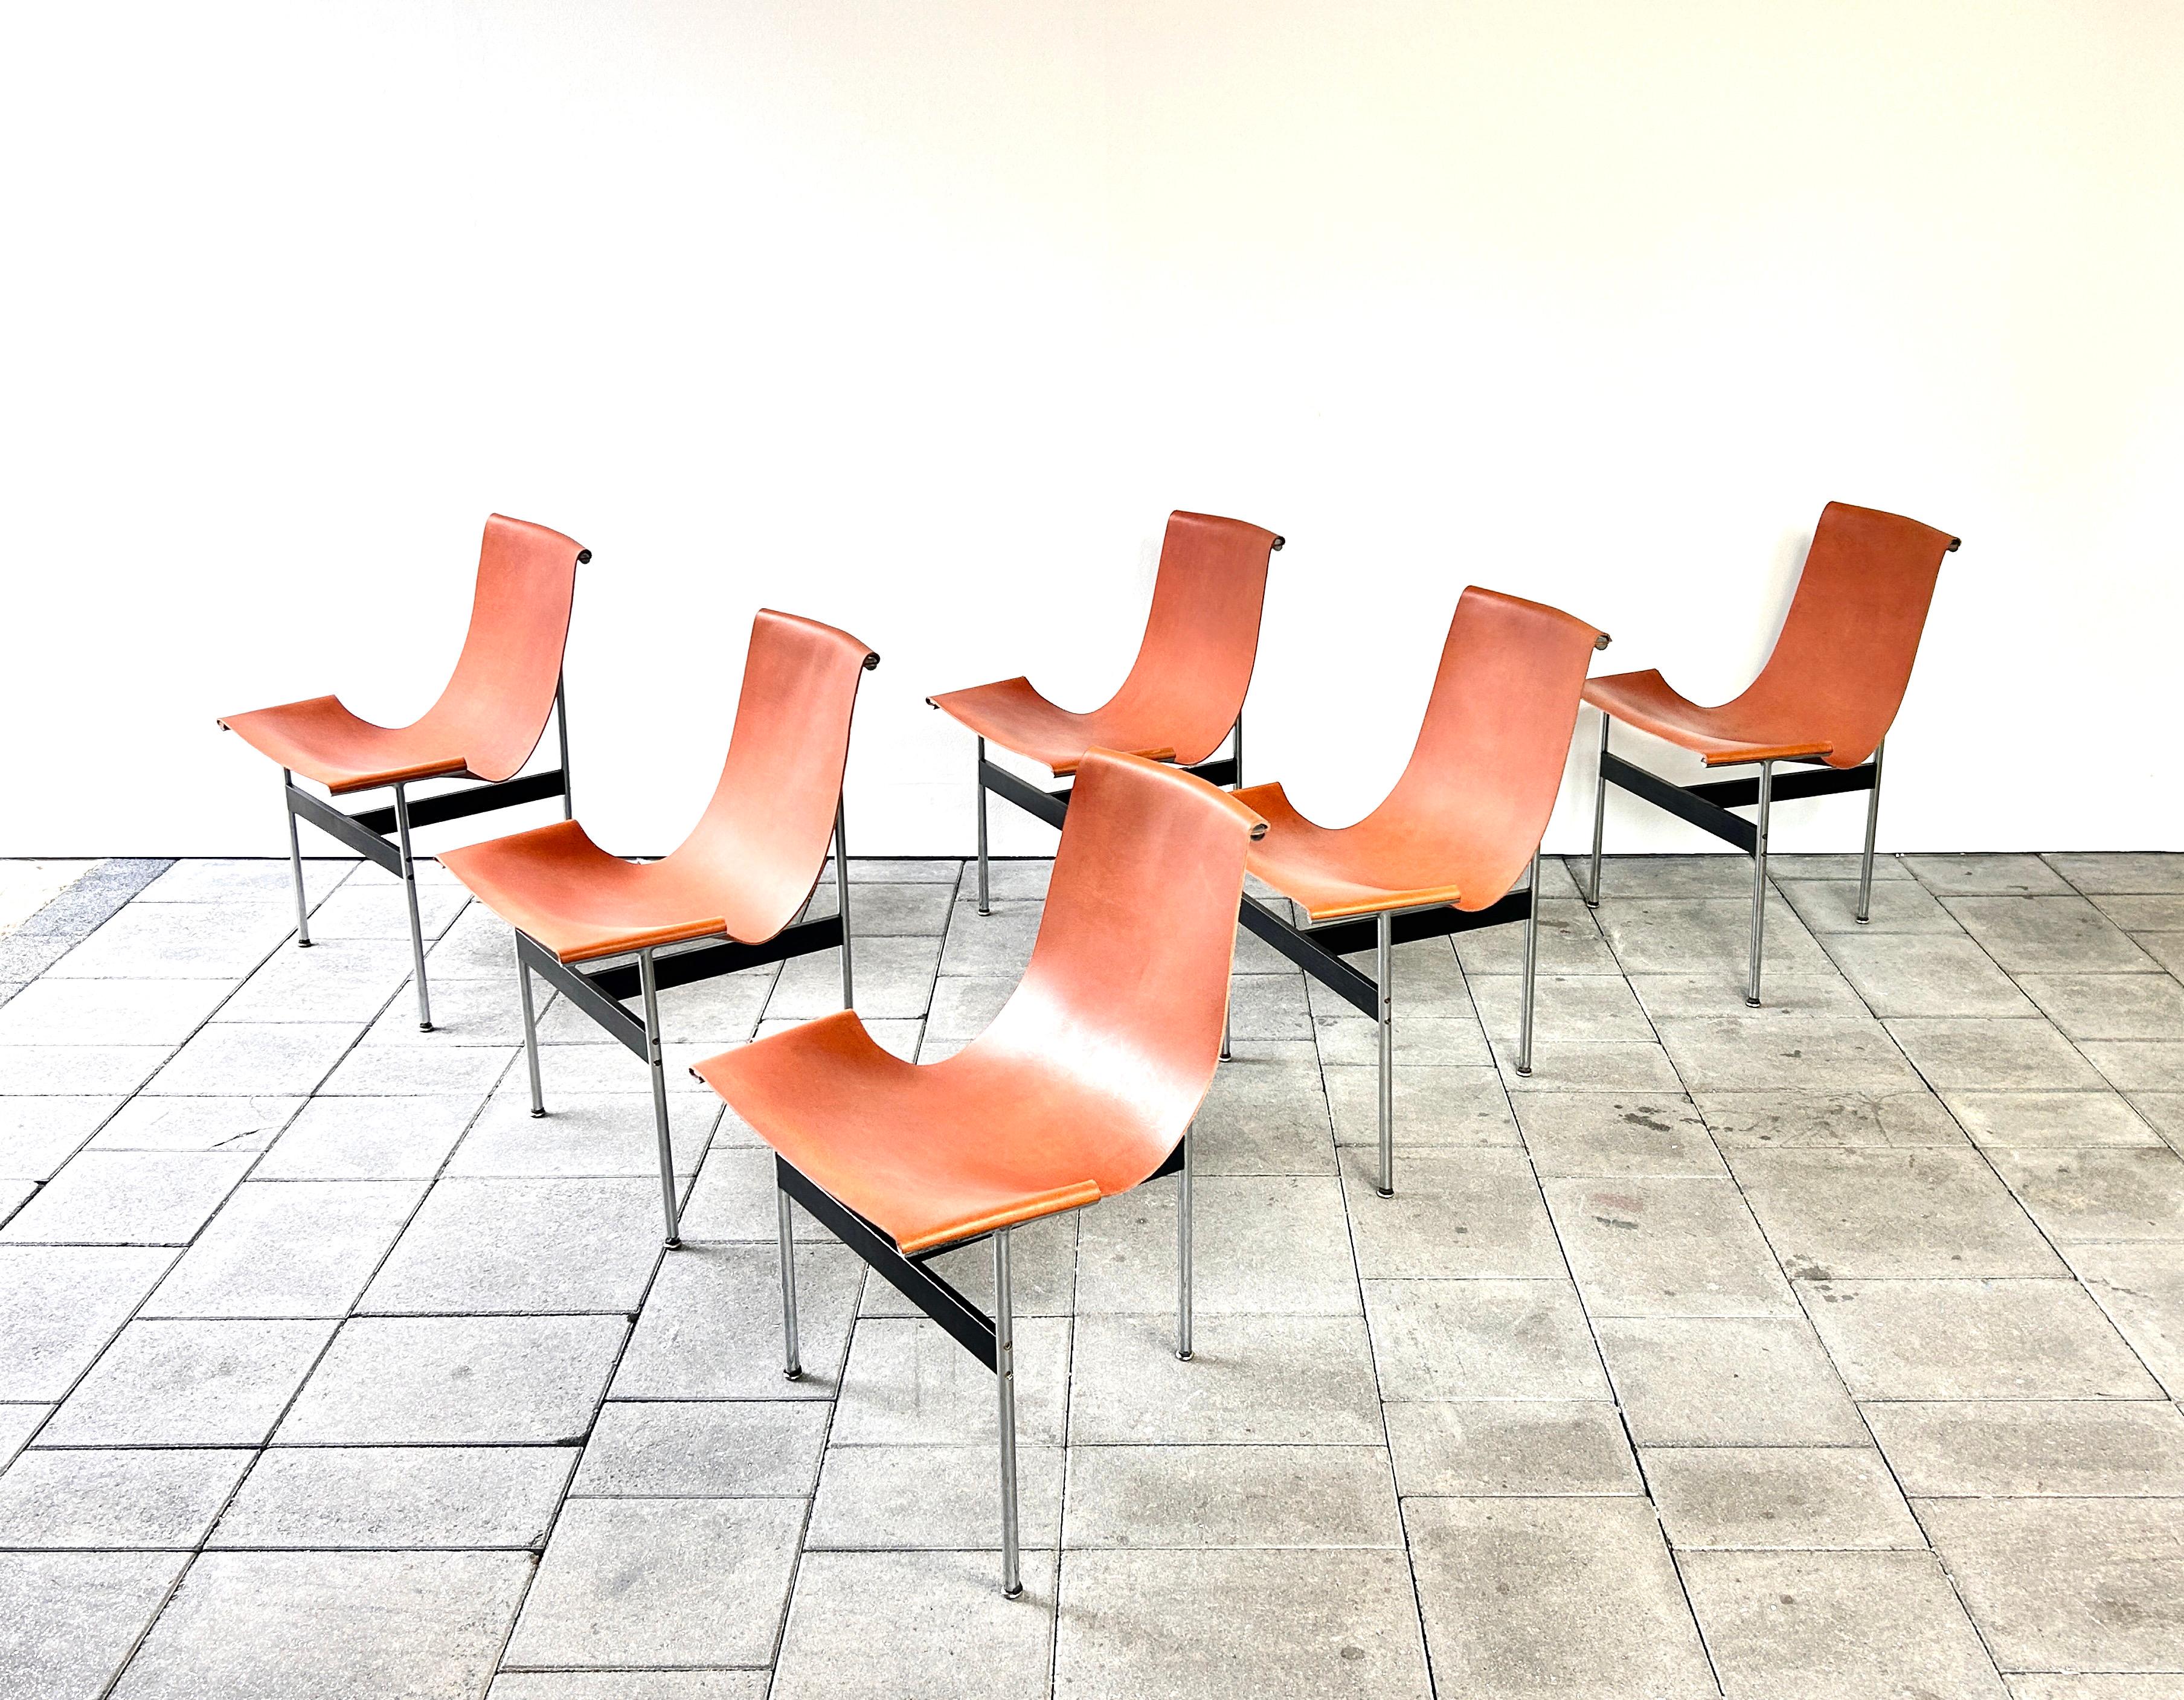 Steel Set of 6 T-chairs designed by Katavolos Litell & Kelley in 1952 For Sale